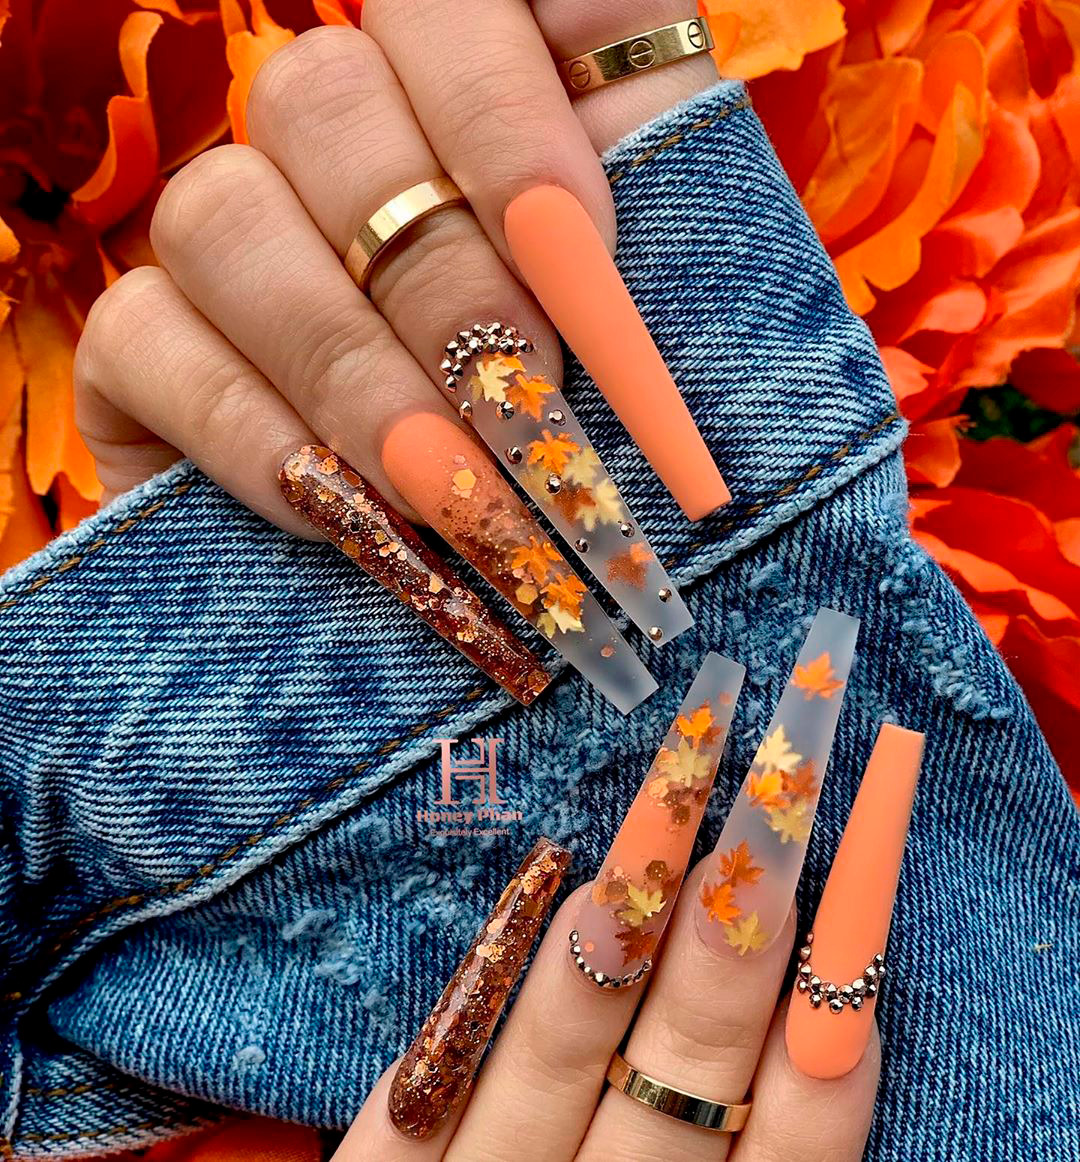 20+ Stunning Fall Nail Designs to Make You Swoon - Bellatory